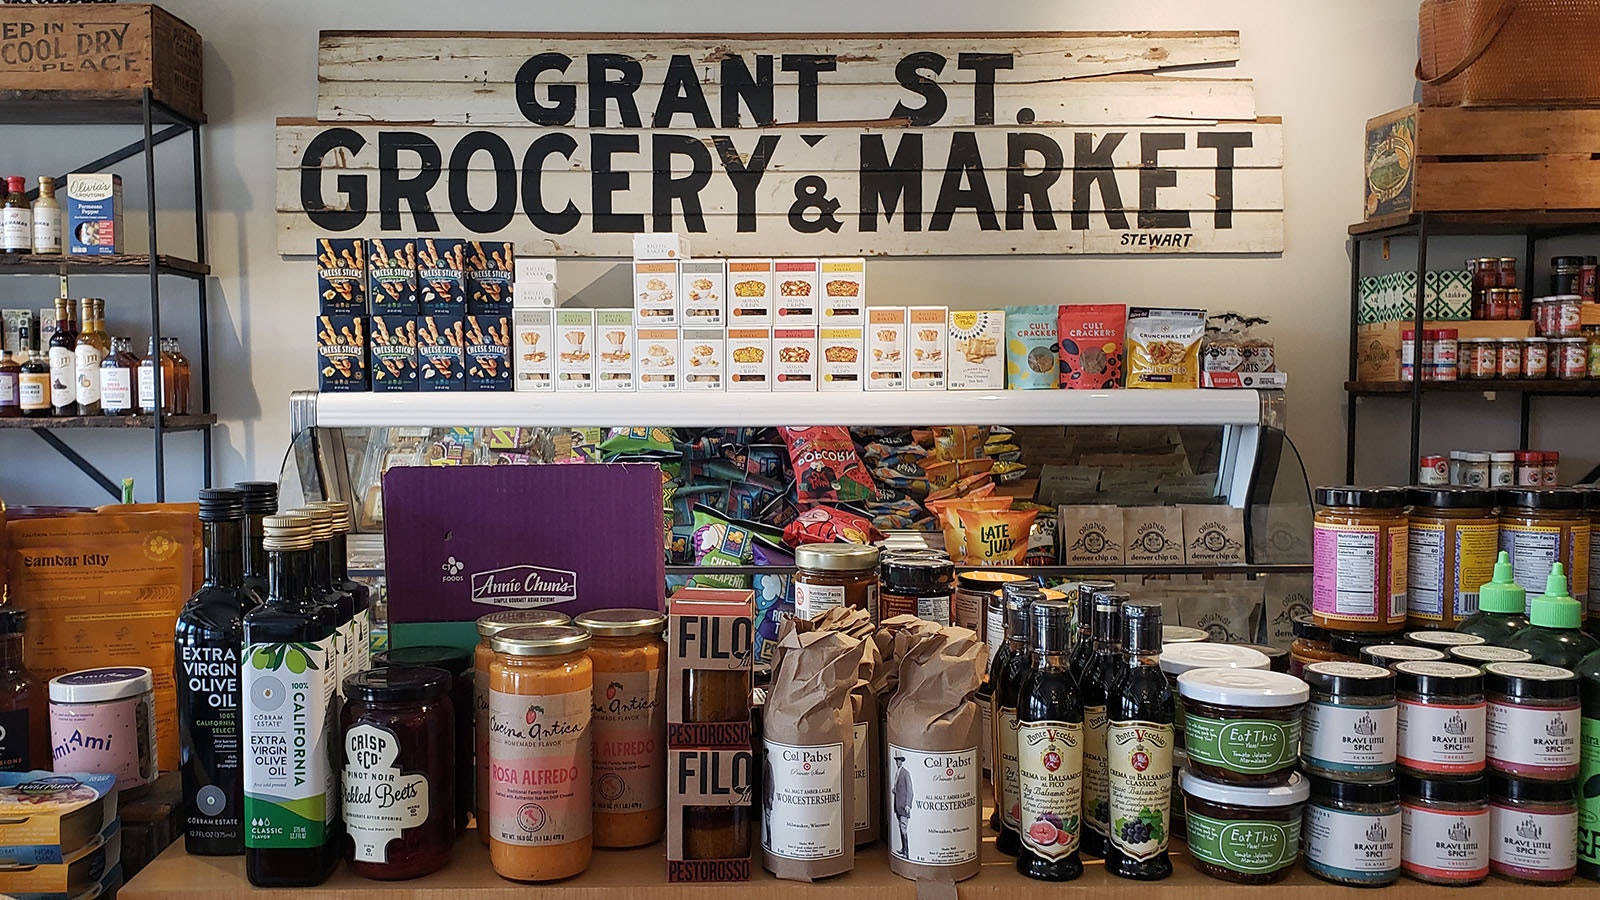 Row after row of specialty pantry staples available at Grant Street Grocery is enough to delight any foodie.